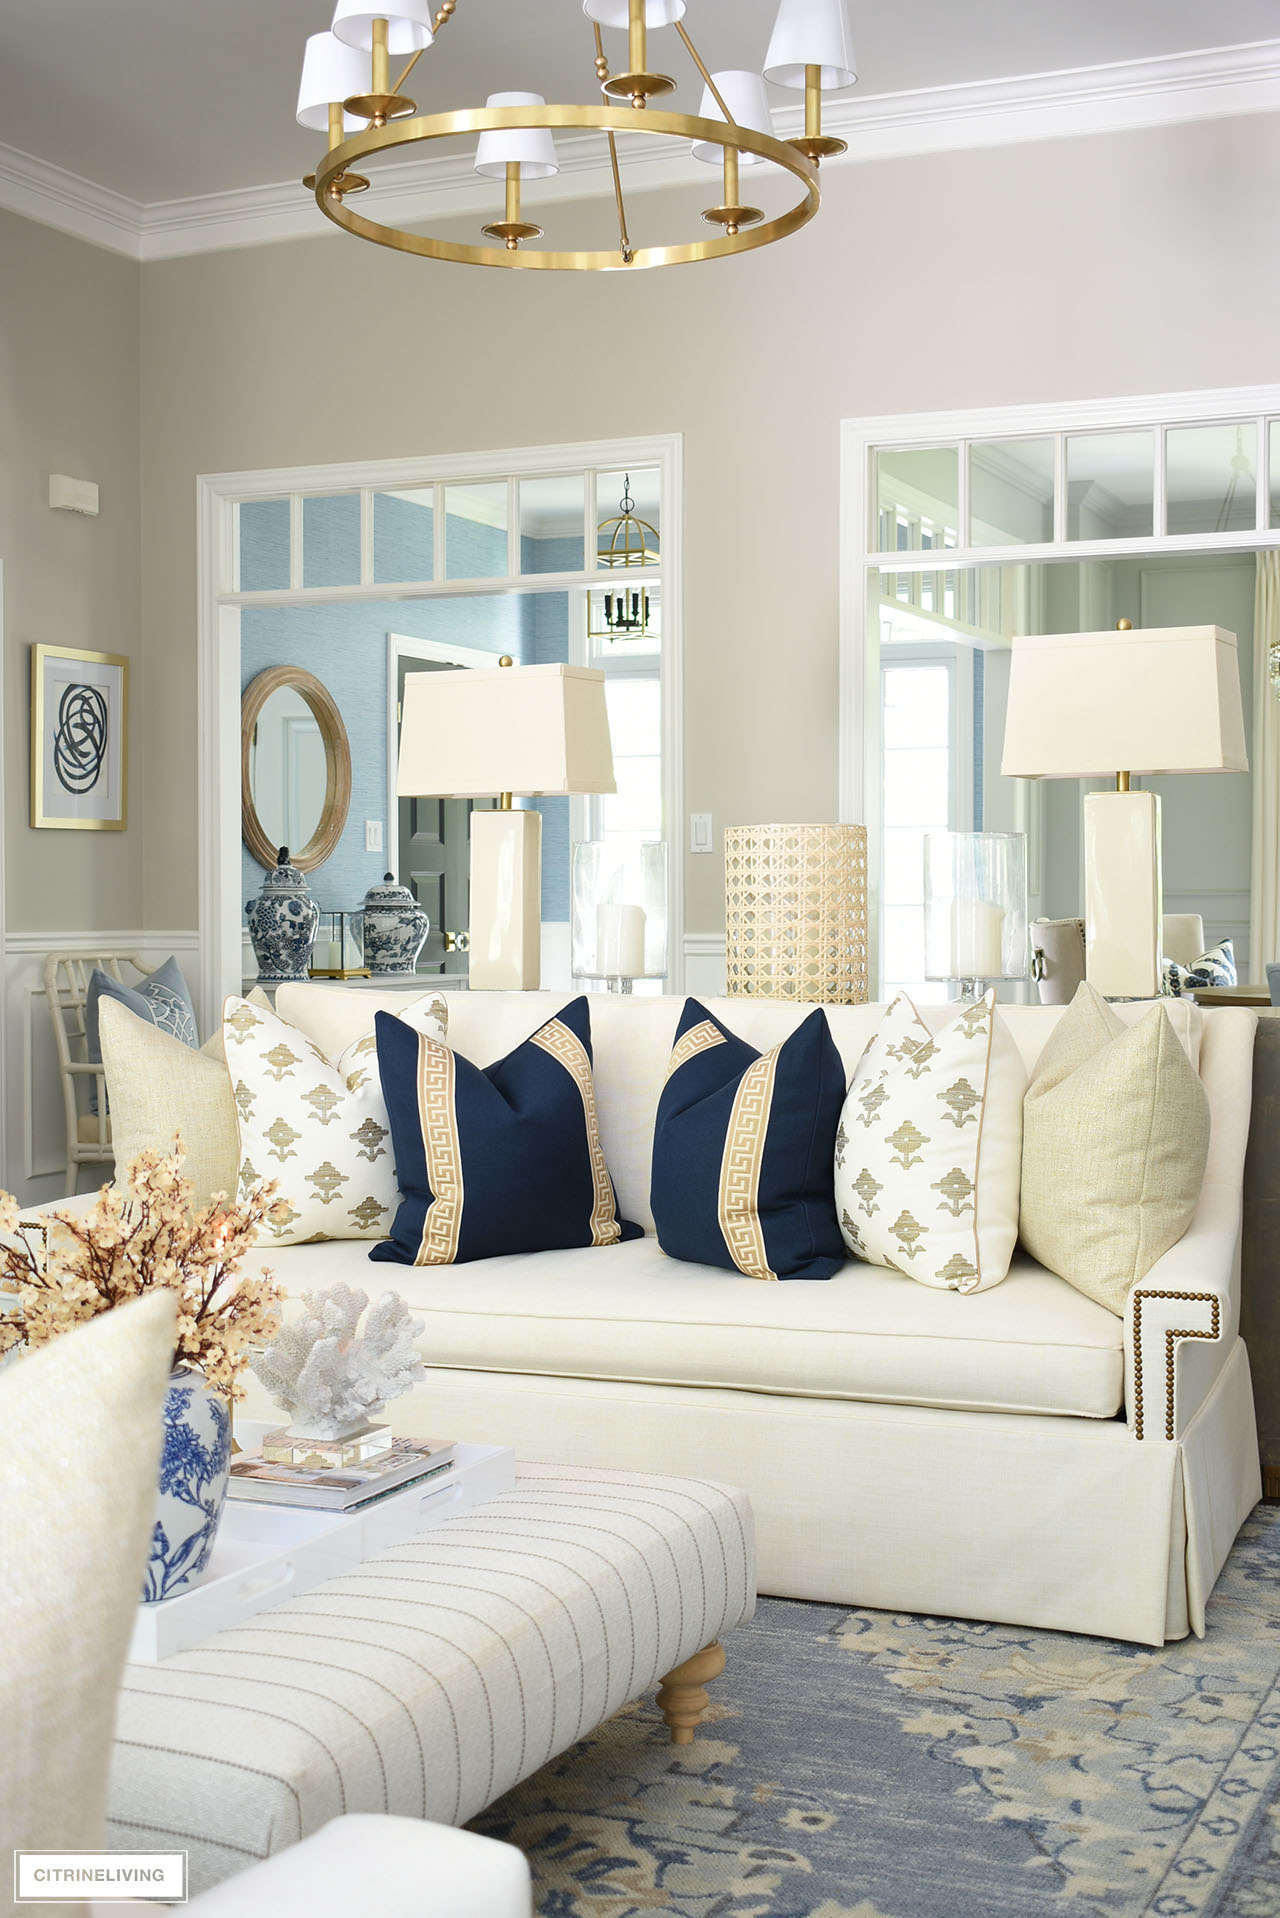 Gorgeous living room styled with elegant fall touches - navy and tan pillows. faux flowers, candles and natural textures.